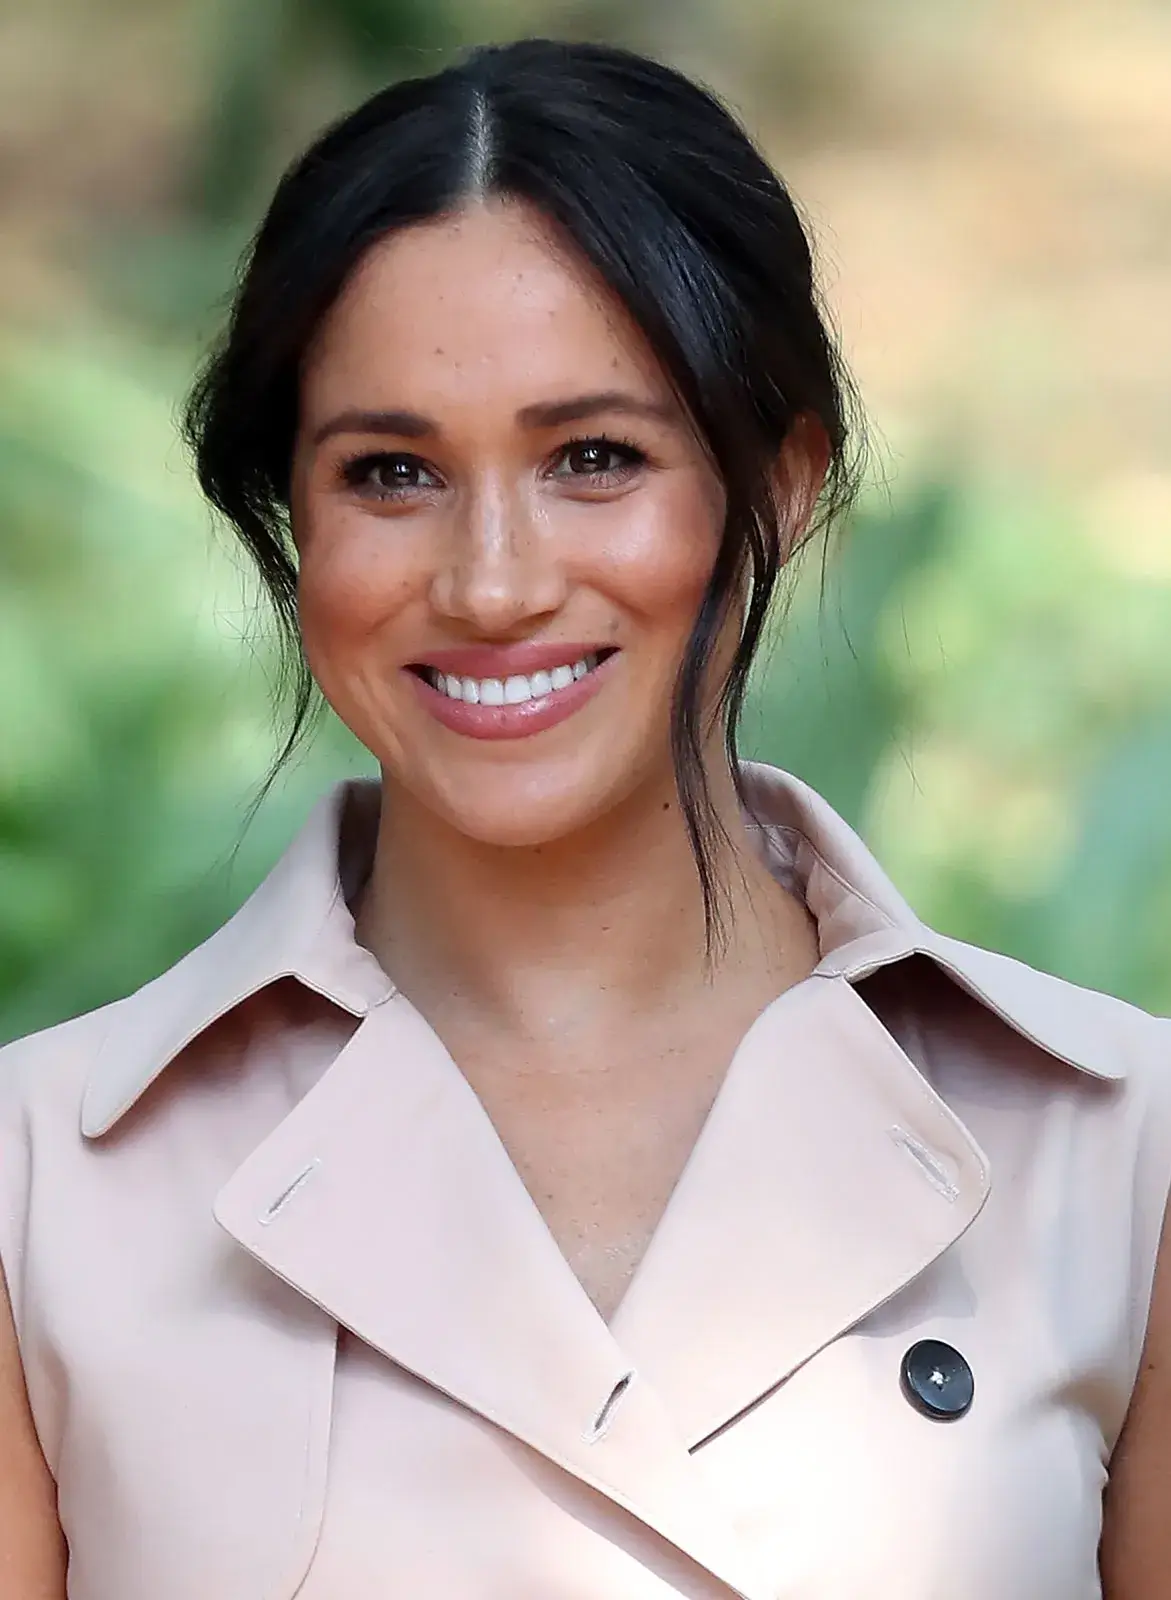 Meghan Markle (Duchess Of Sussex)